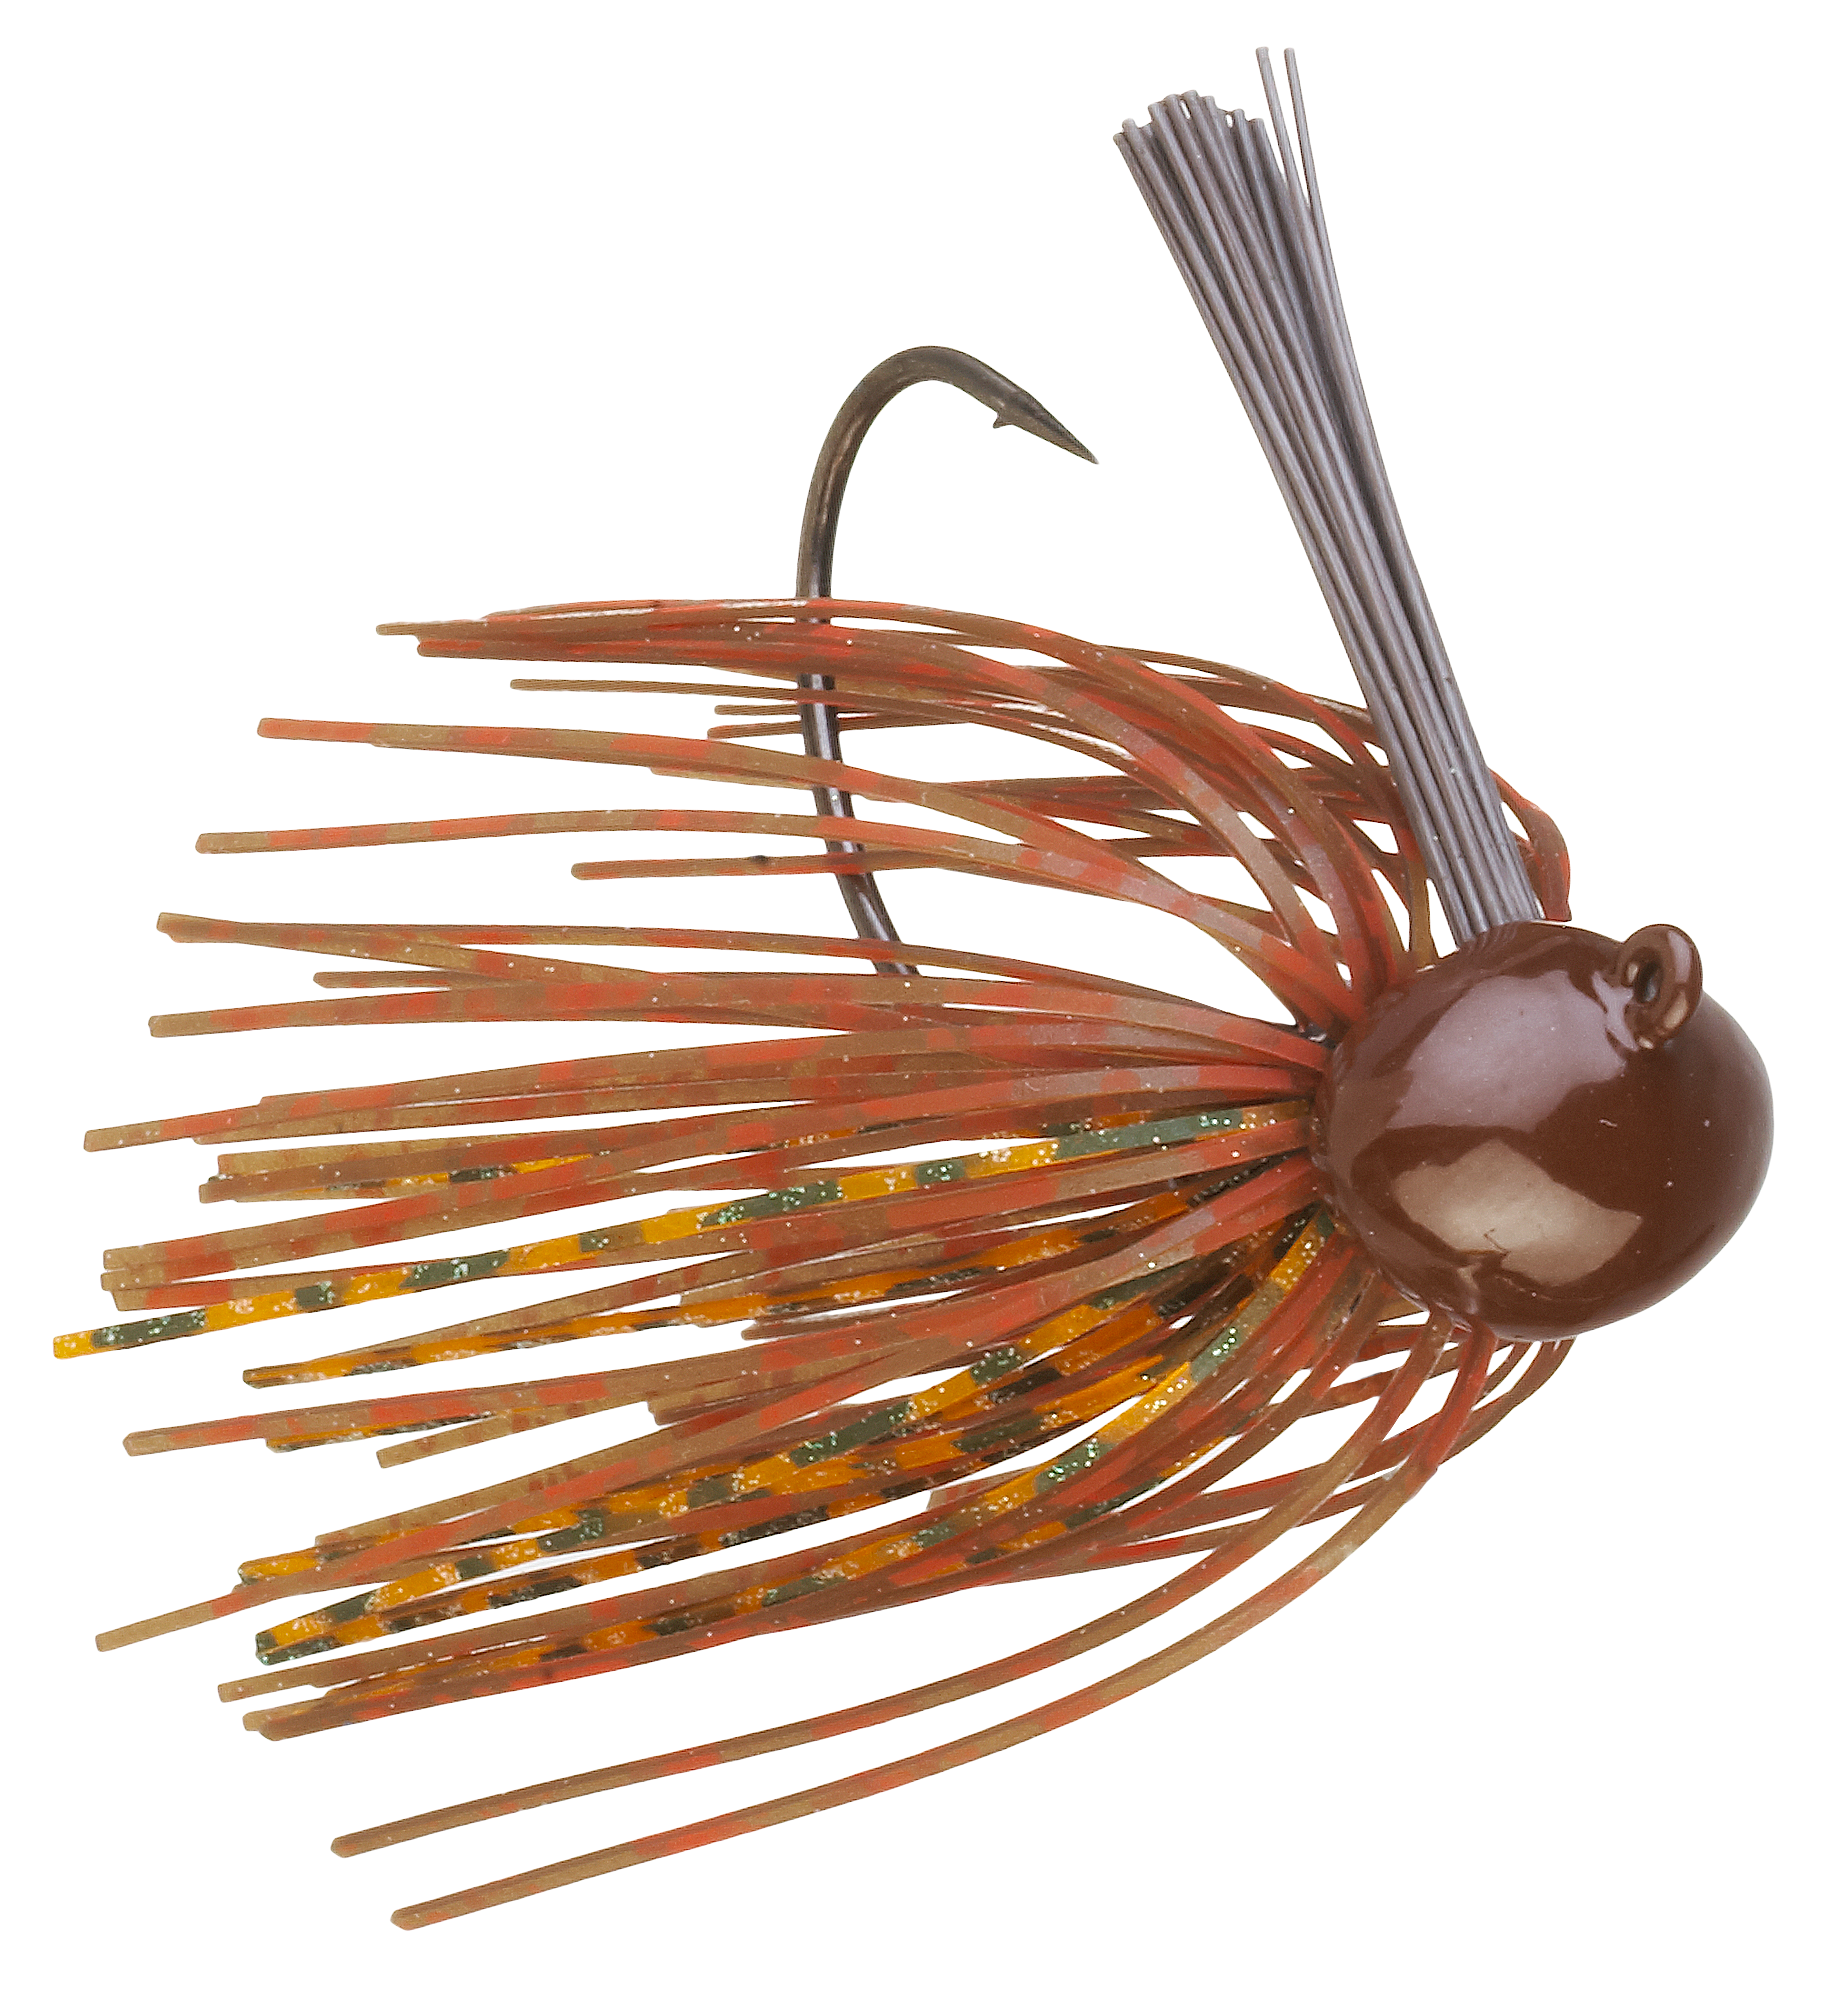 The Buckeye Lures Ballin' Out Jig - The ultimate Secret Weapon 